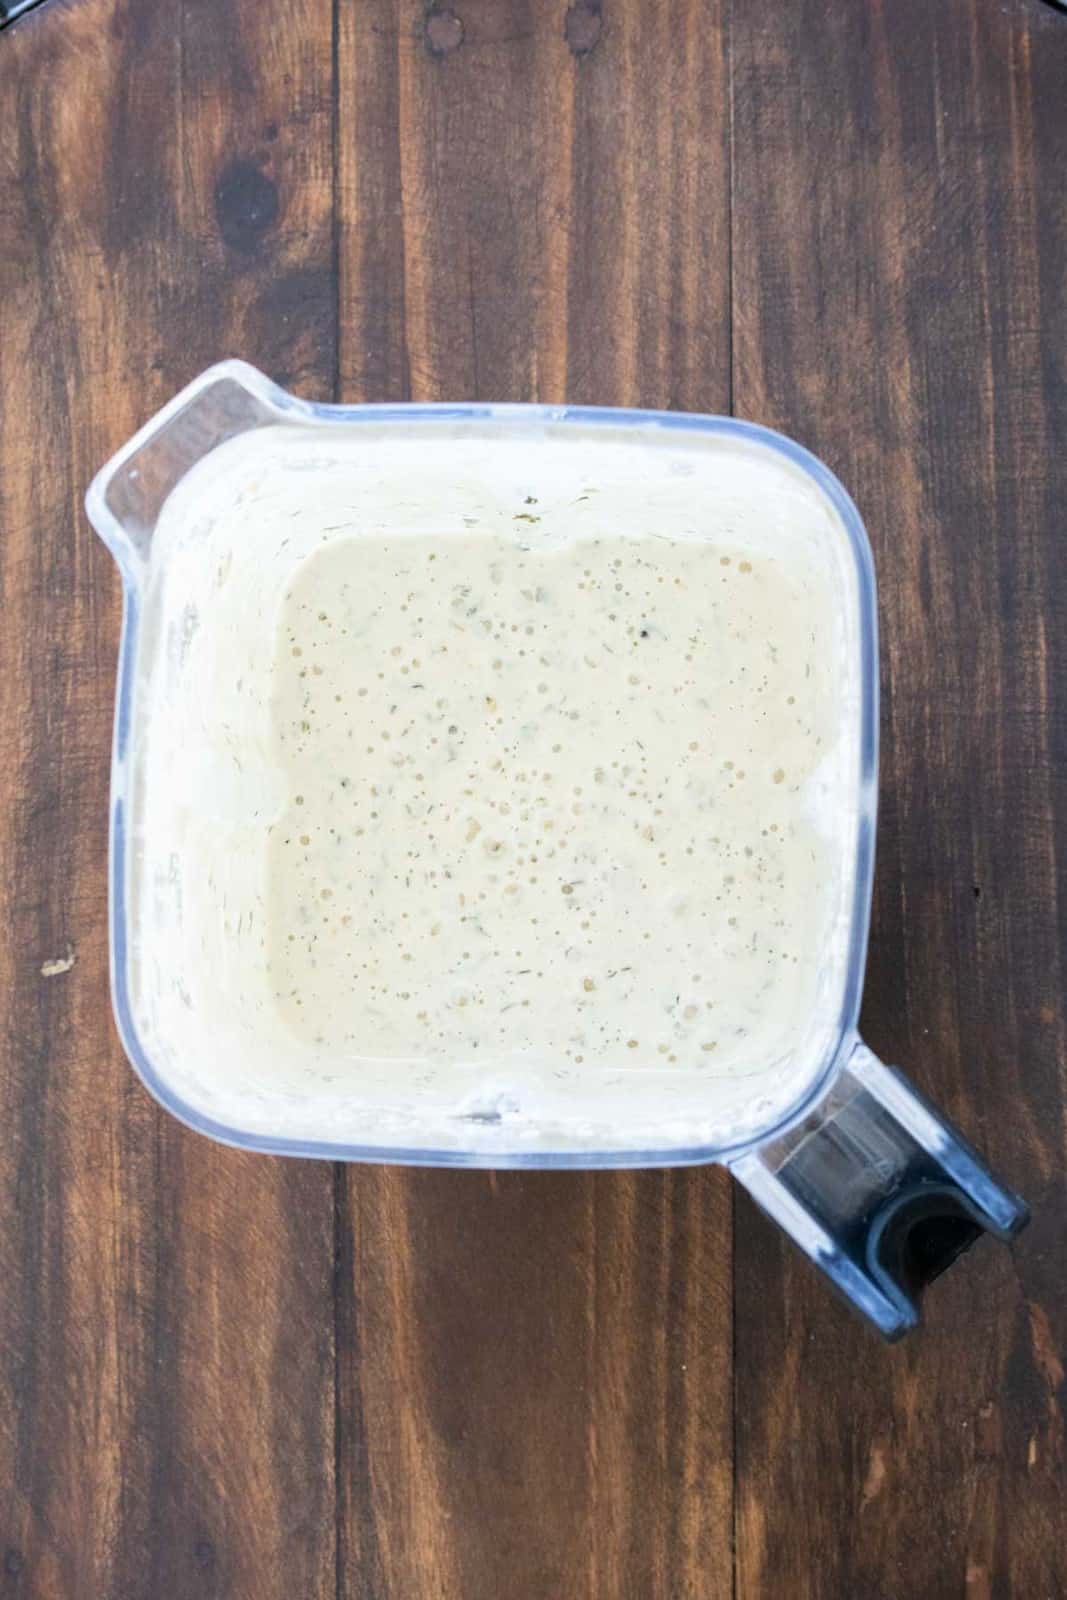 Top view of ranch dressing in a blender